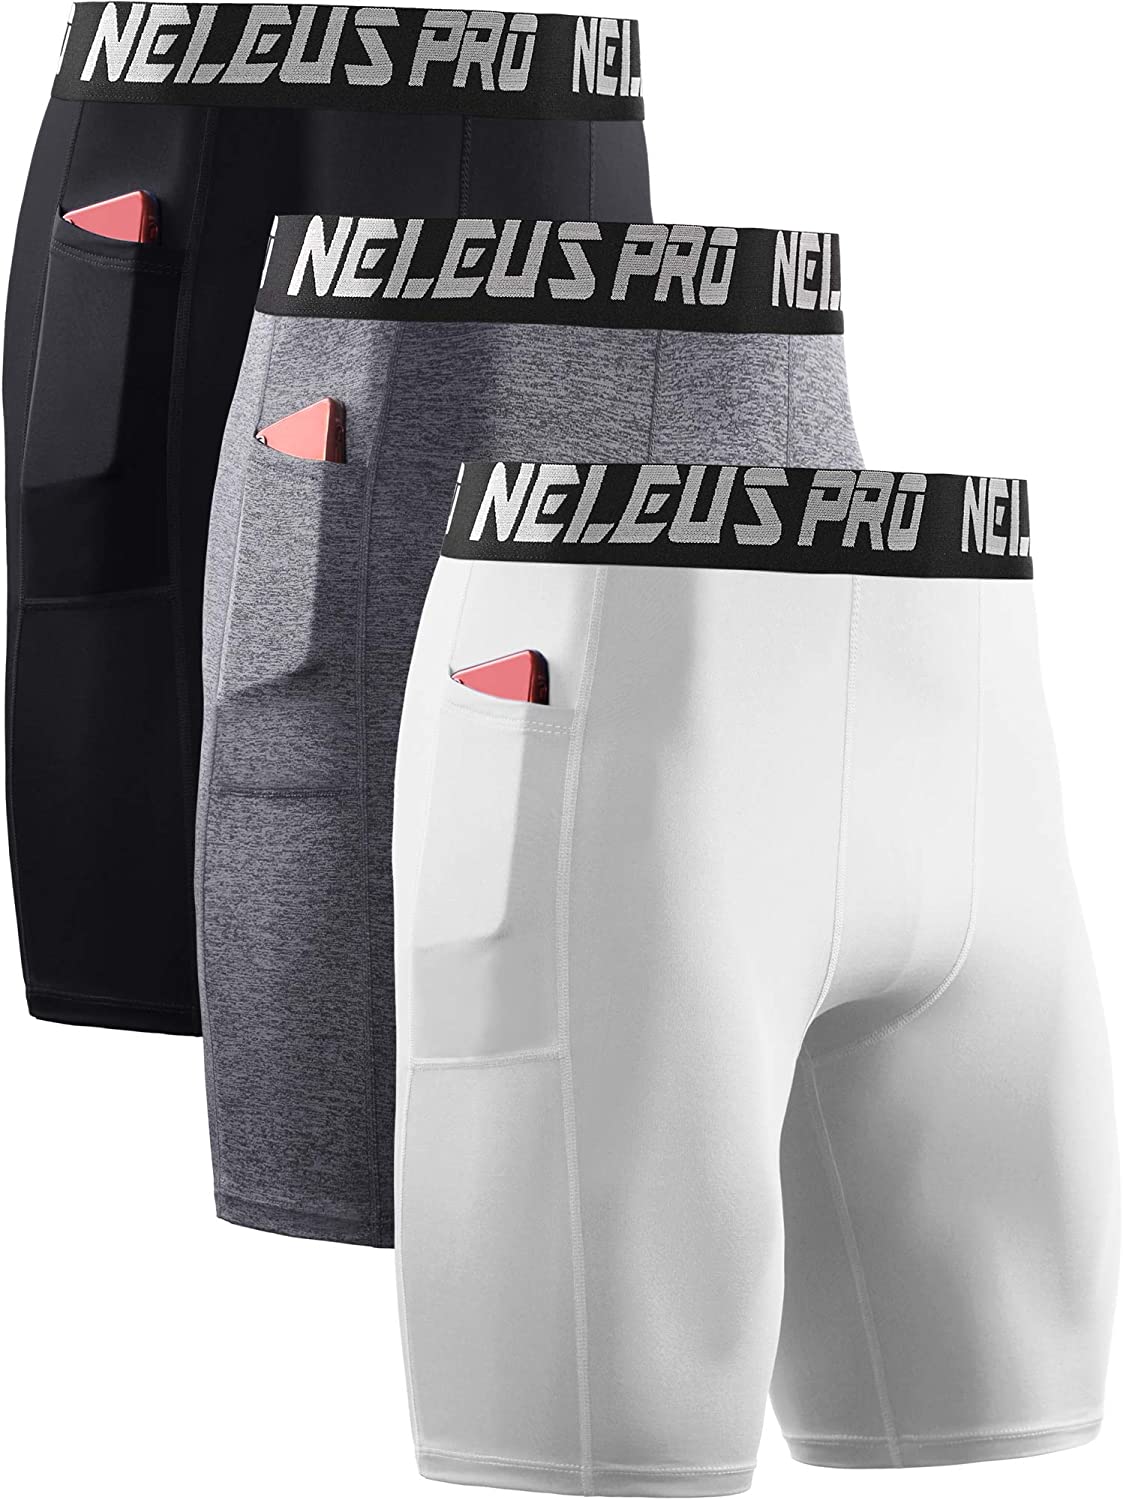 Neleus Mens 3 Pack Compression Shorts with Pockets Dry Fit Professional Athletic Shorts 